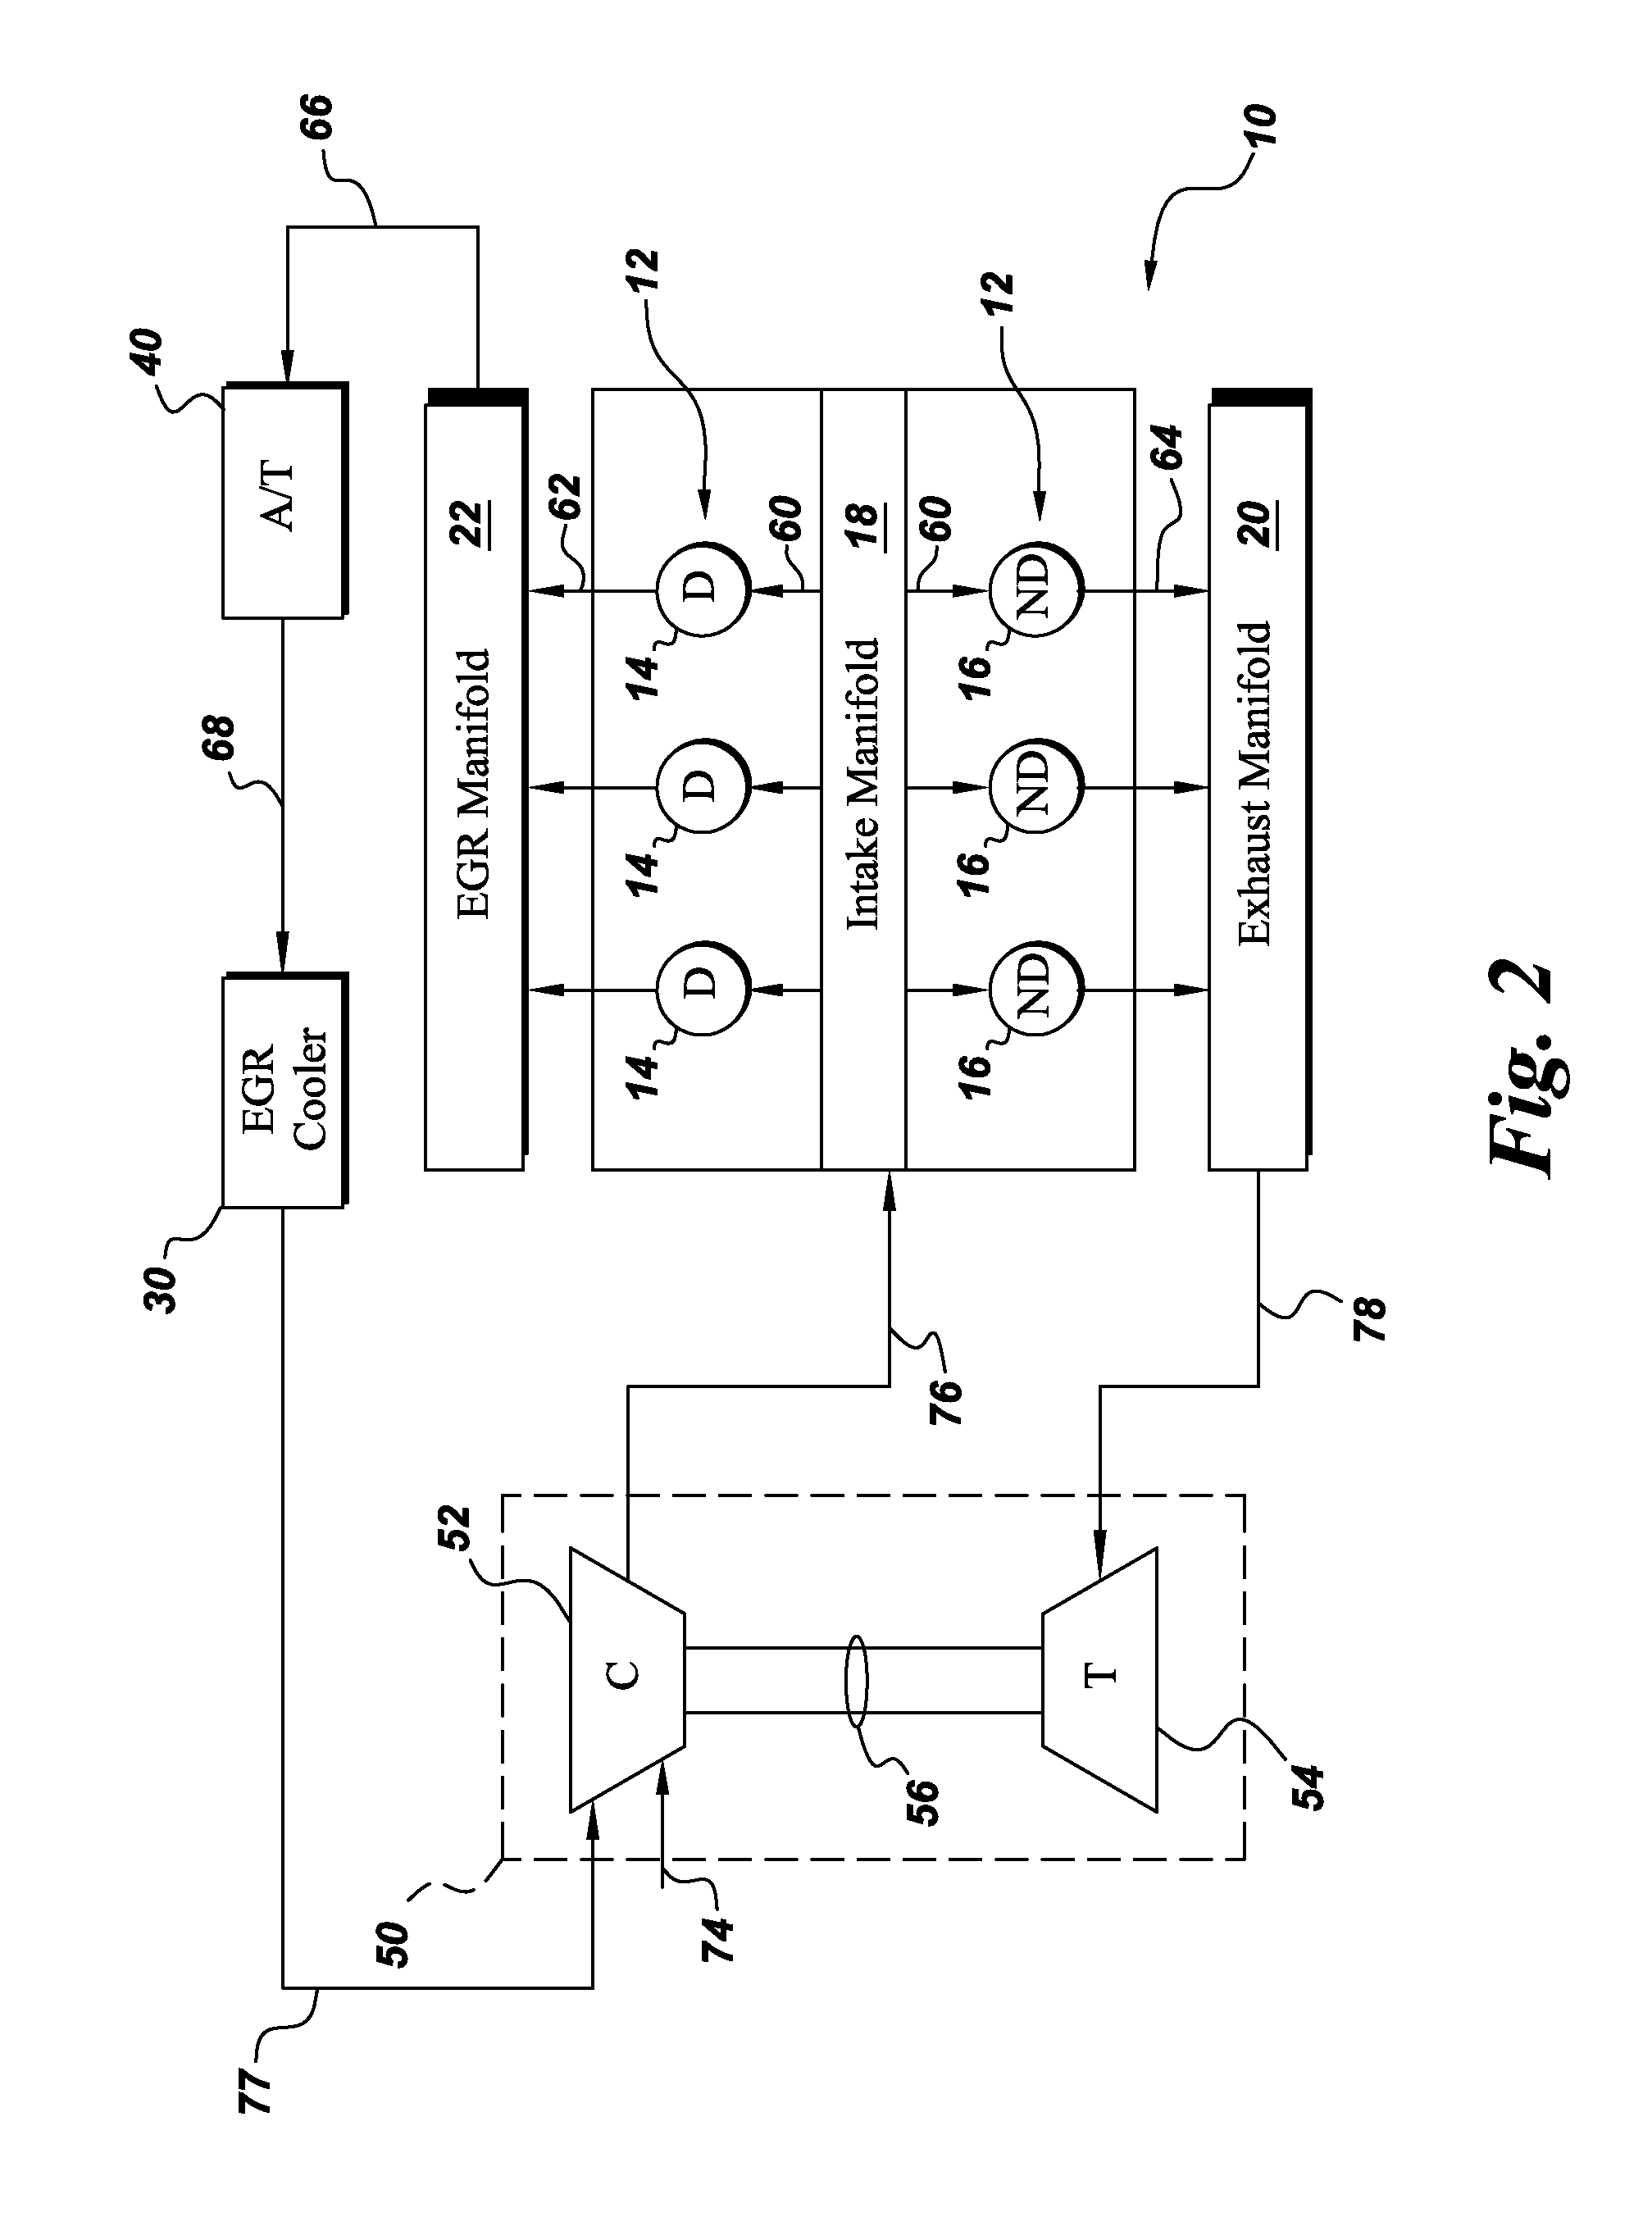 Exhaust gas recirculation in a reciprocating engine with continuously regenerating particulate trap